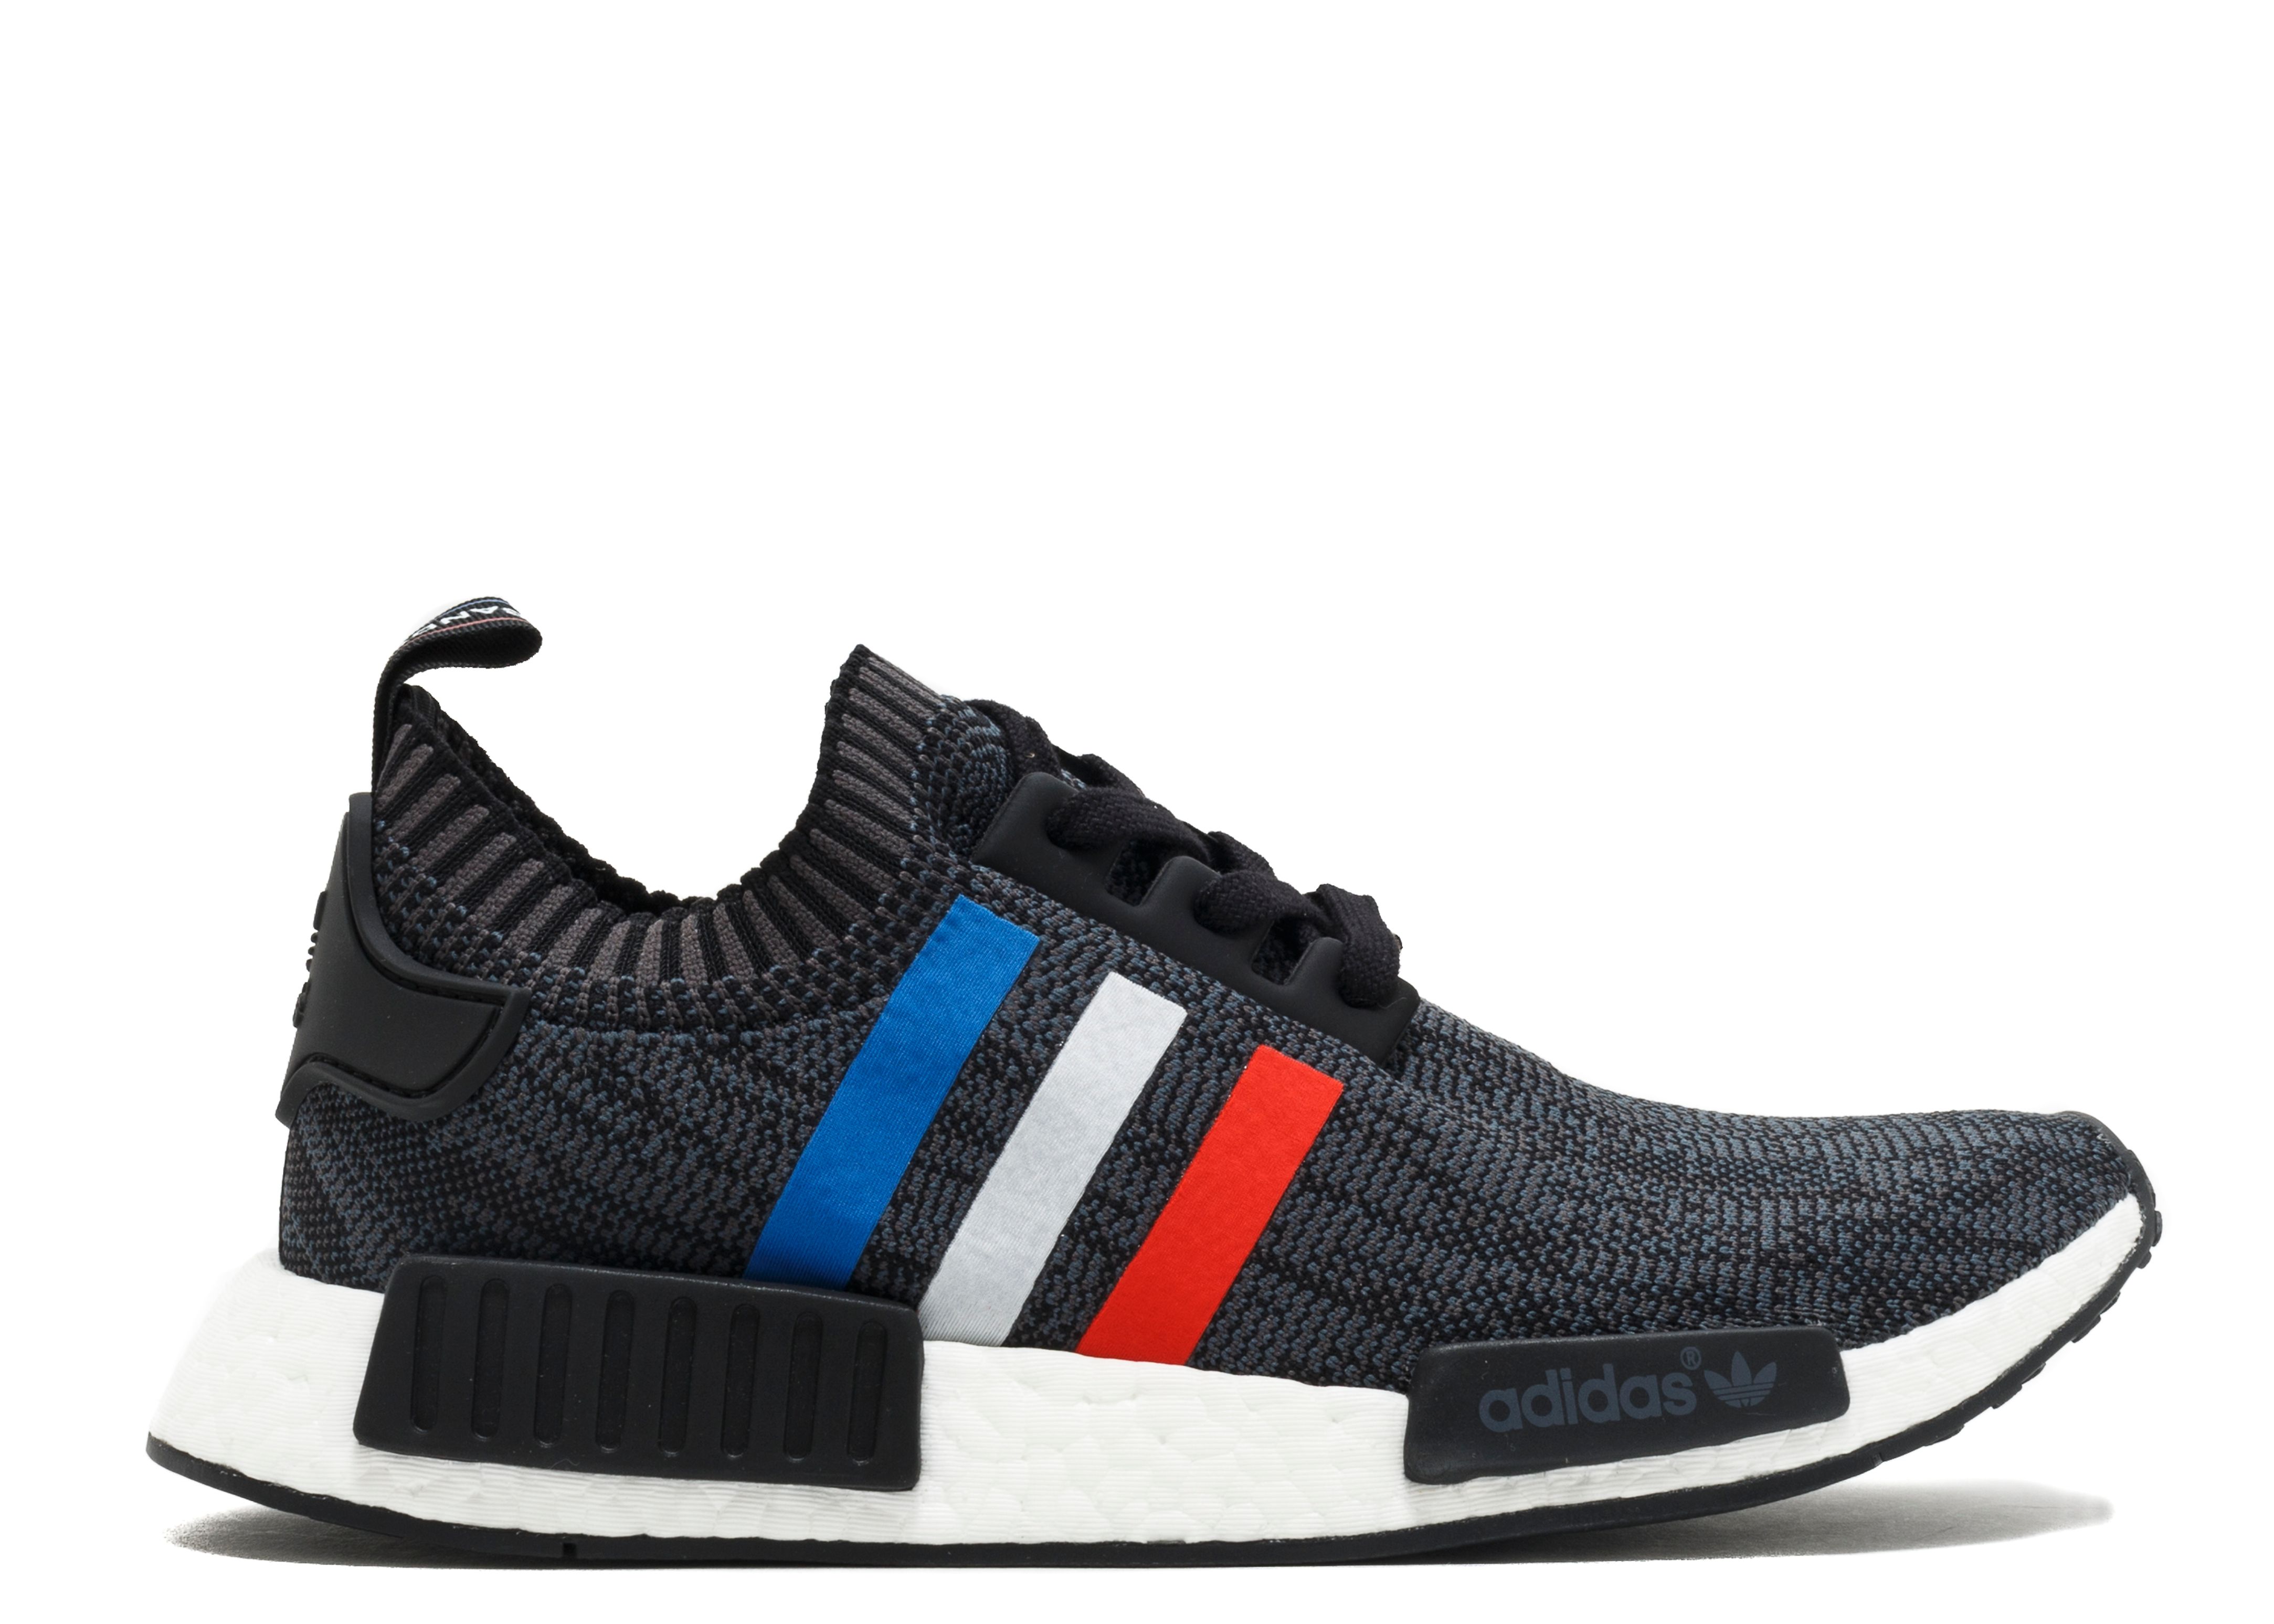 Nmd R1 Pk Tri Color Adidas Bb2887 Cblack Cred Coloring Wallpapers Download Free Images Wallpaper [coloring436.blogspot.com]